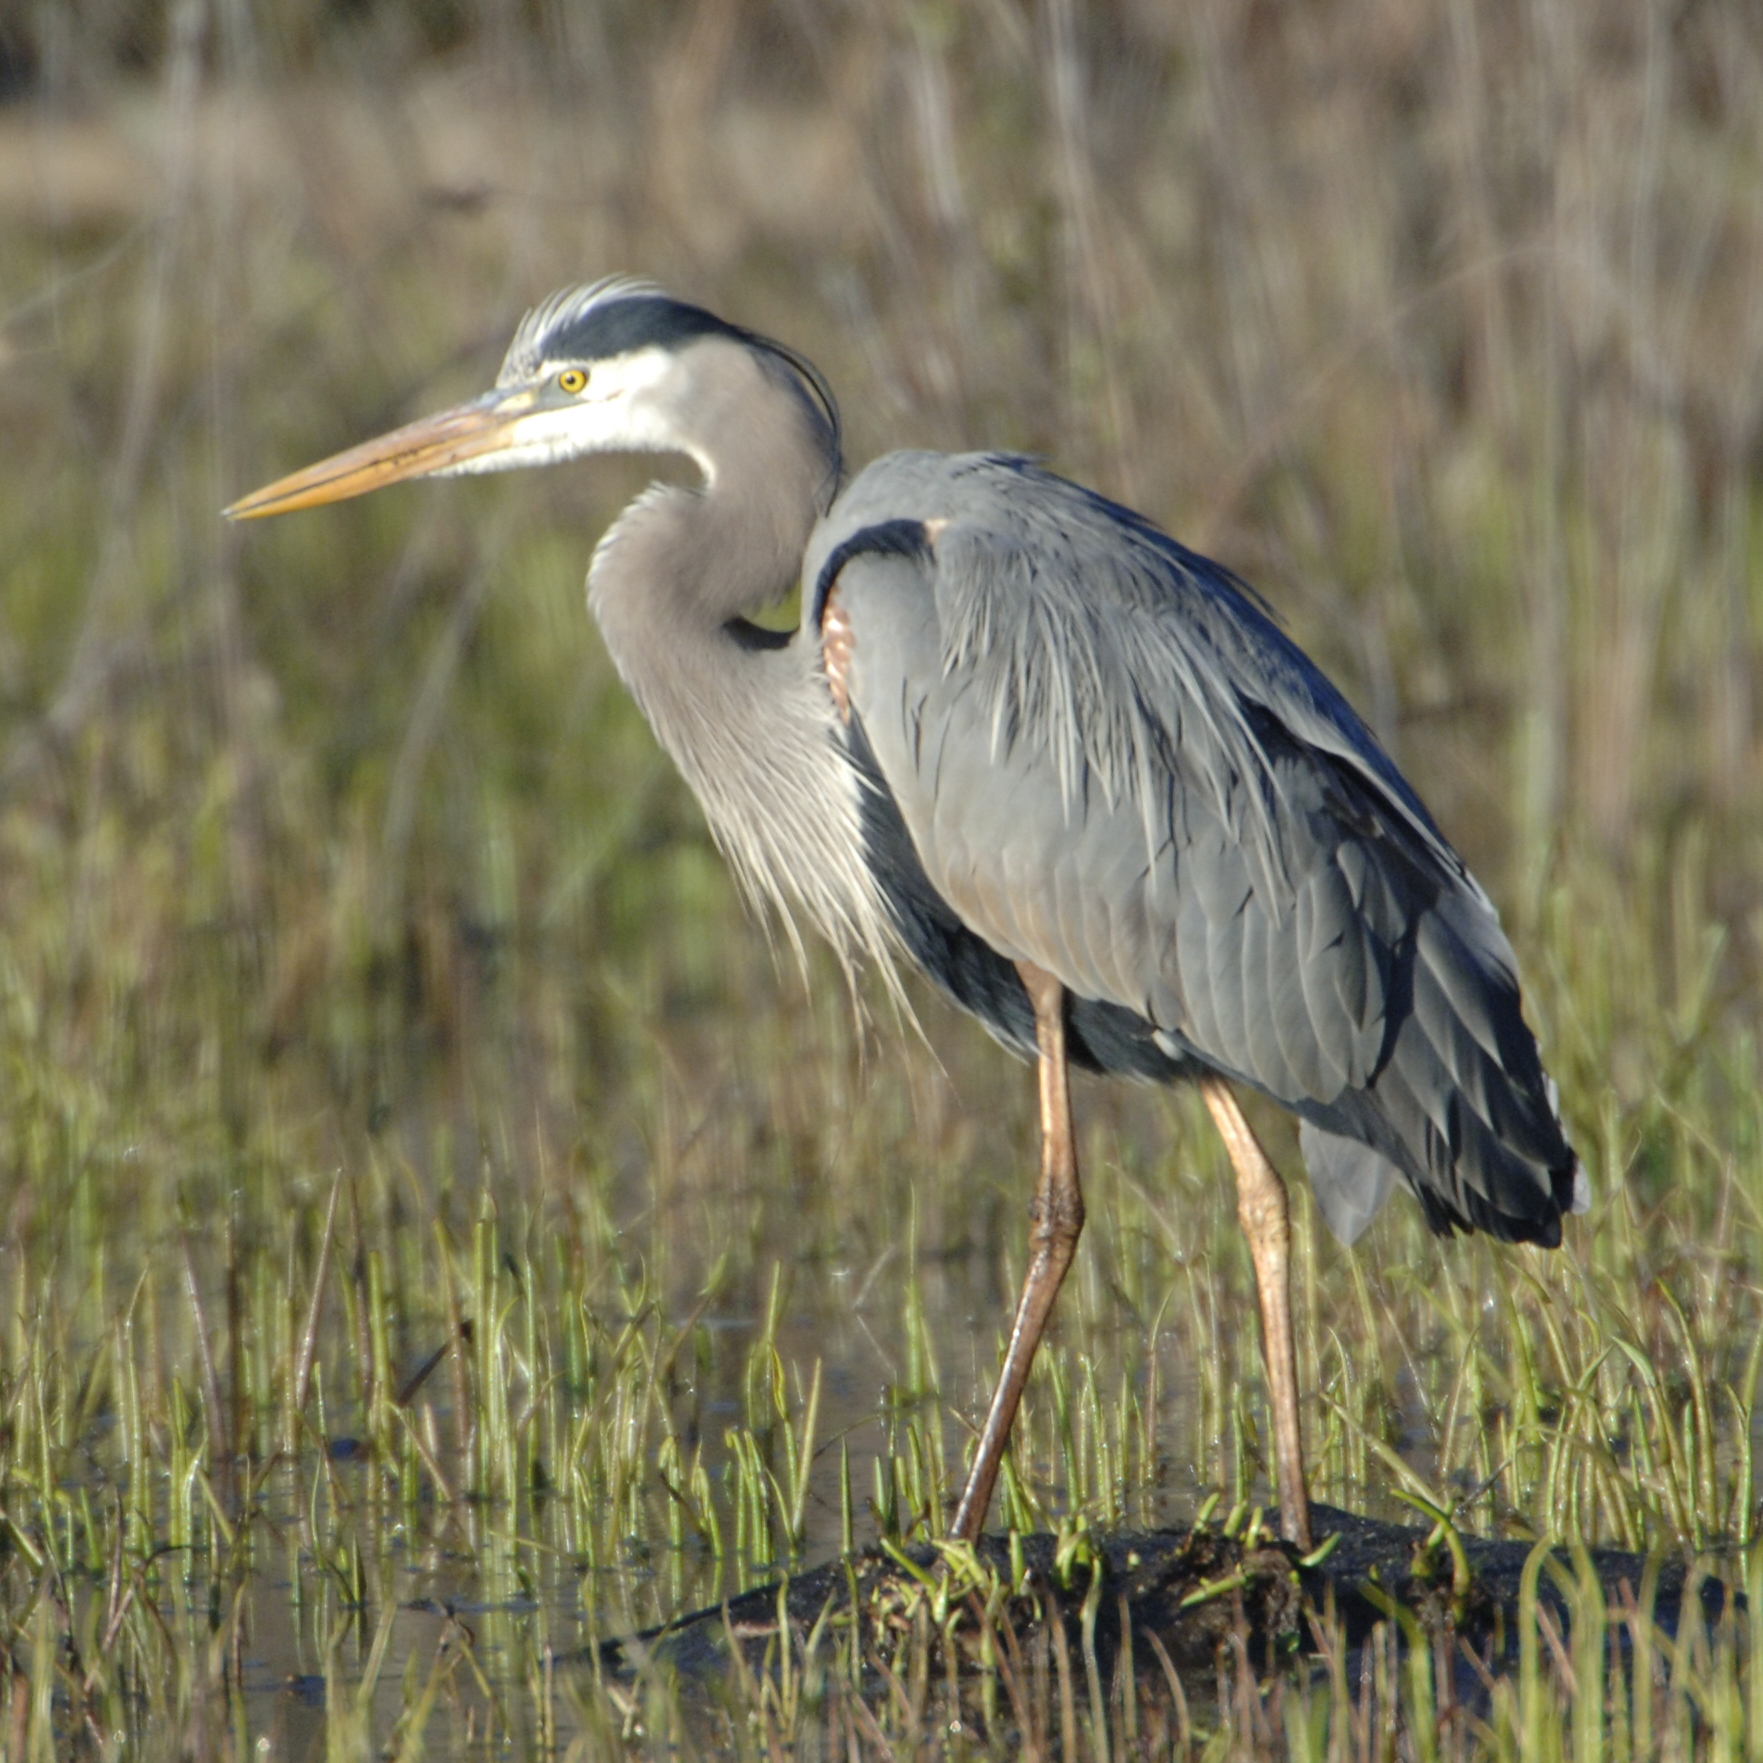 A great blue heron with grey, black and white feathers and a yellow beak stands among short grasses submerged in water.